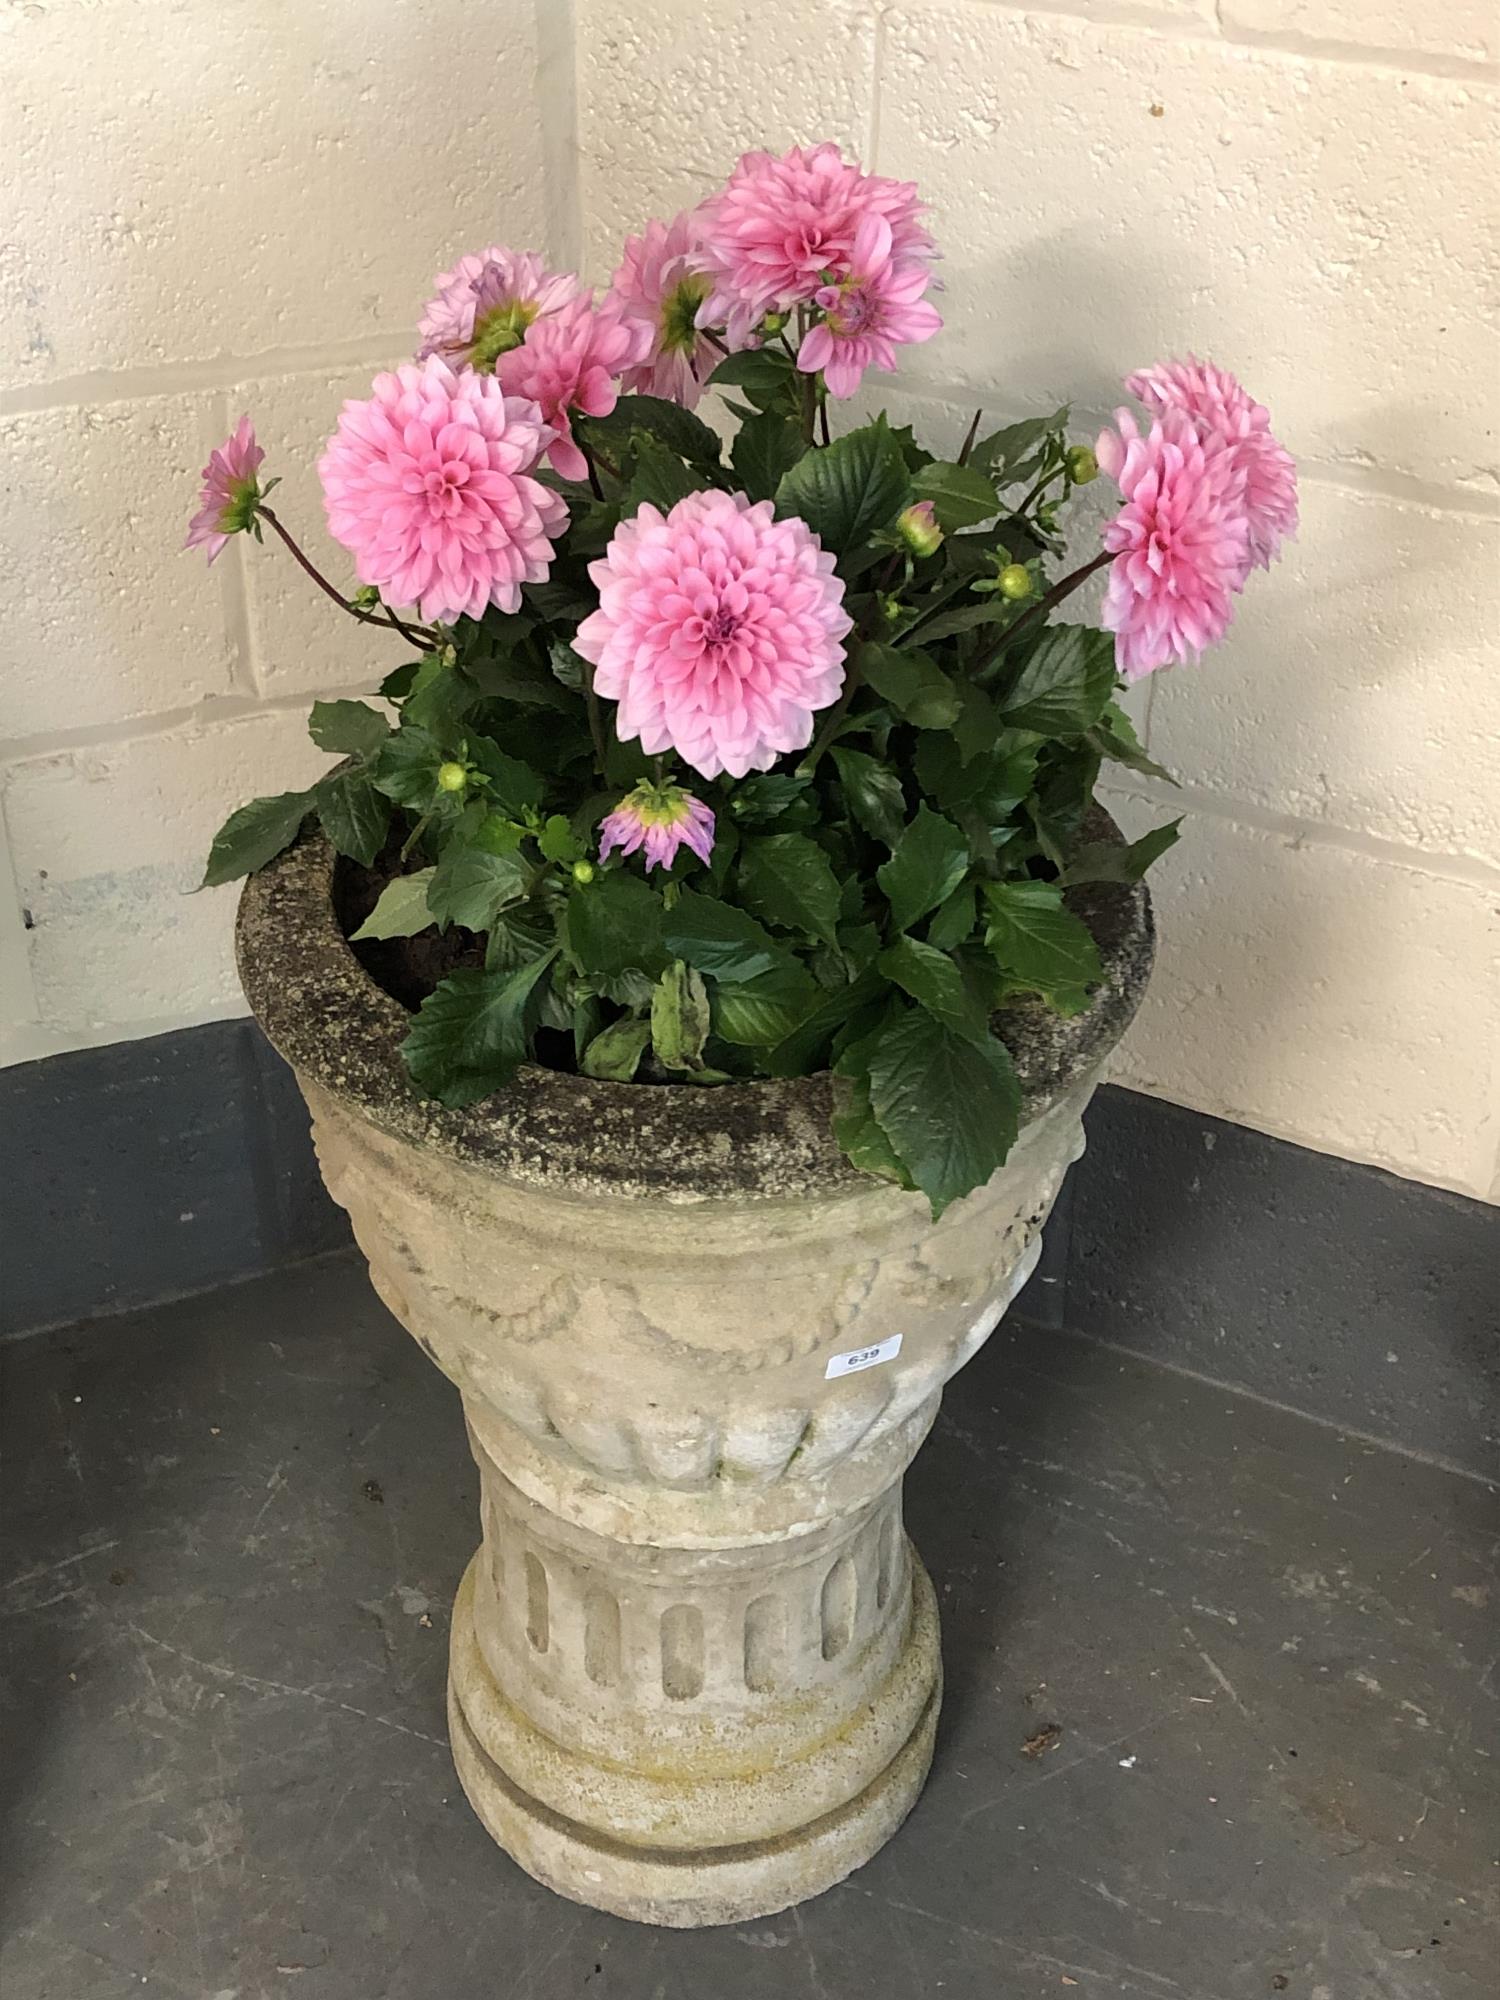 A composition stone classical urn on stand planted with Dahlias,